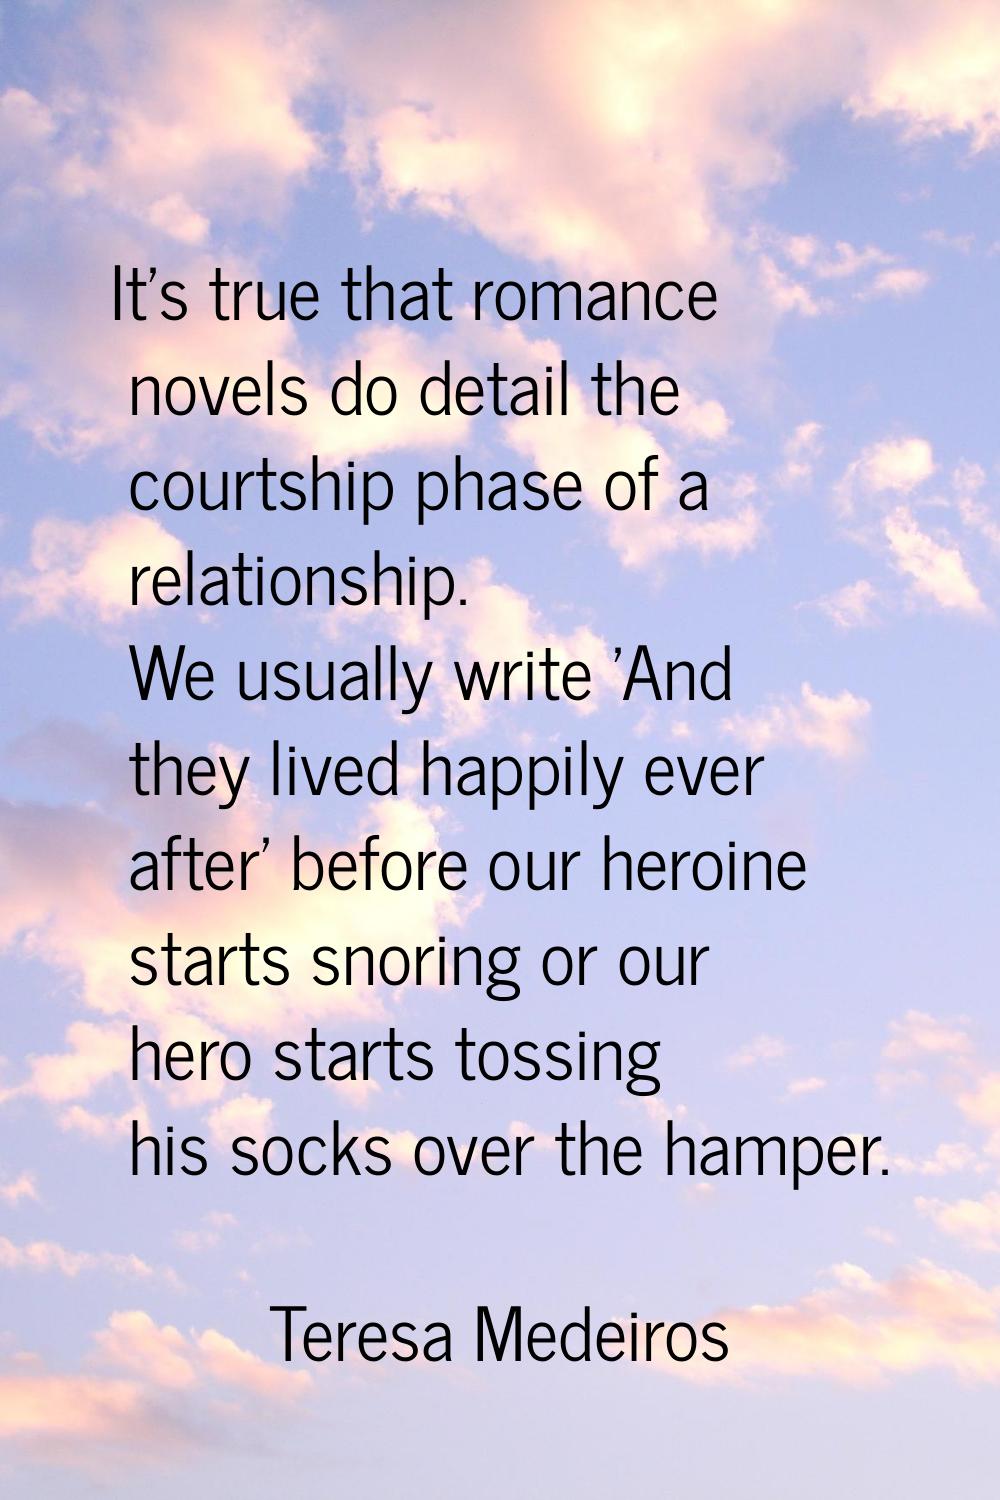 It's true that romance novels do detail the courtship phase of a relationship. We usually write 'An